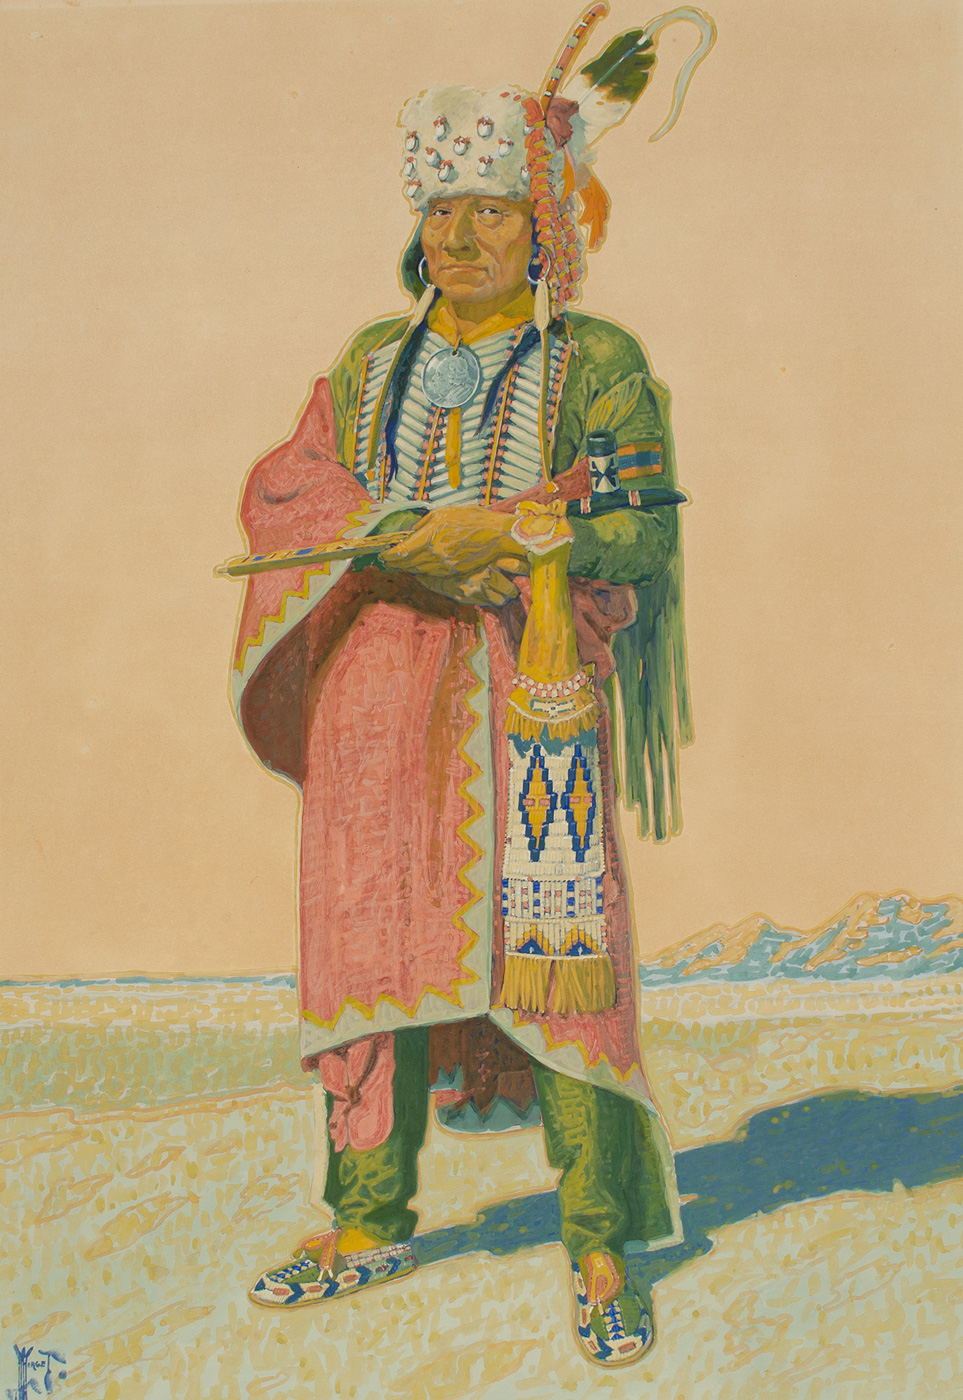 A full length portrait of an Arapaho man in tribal clothing.